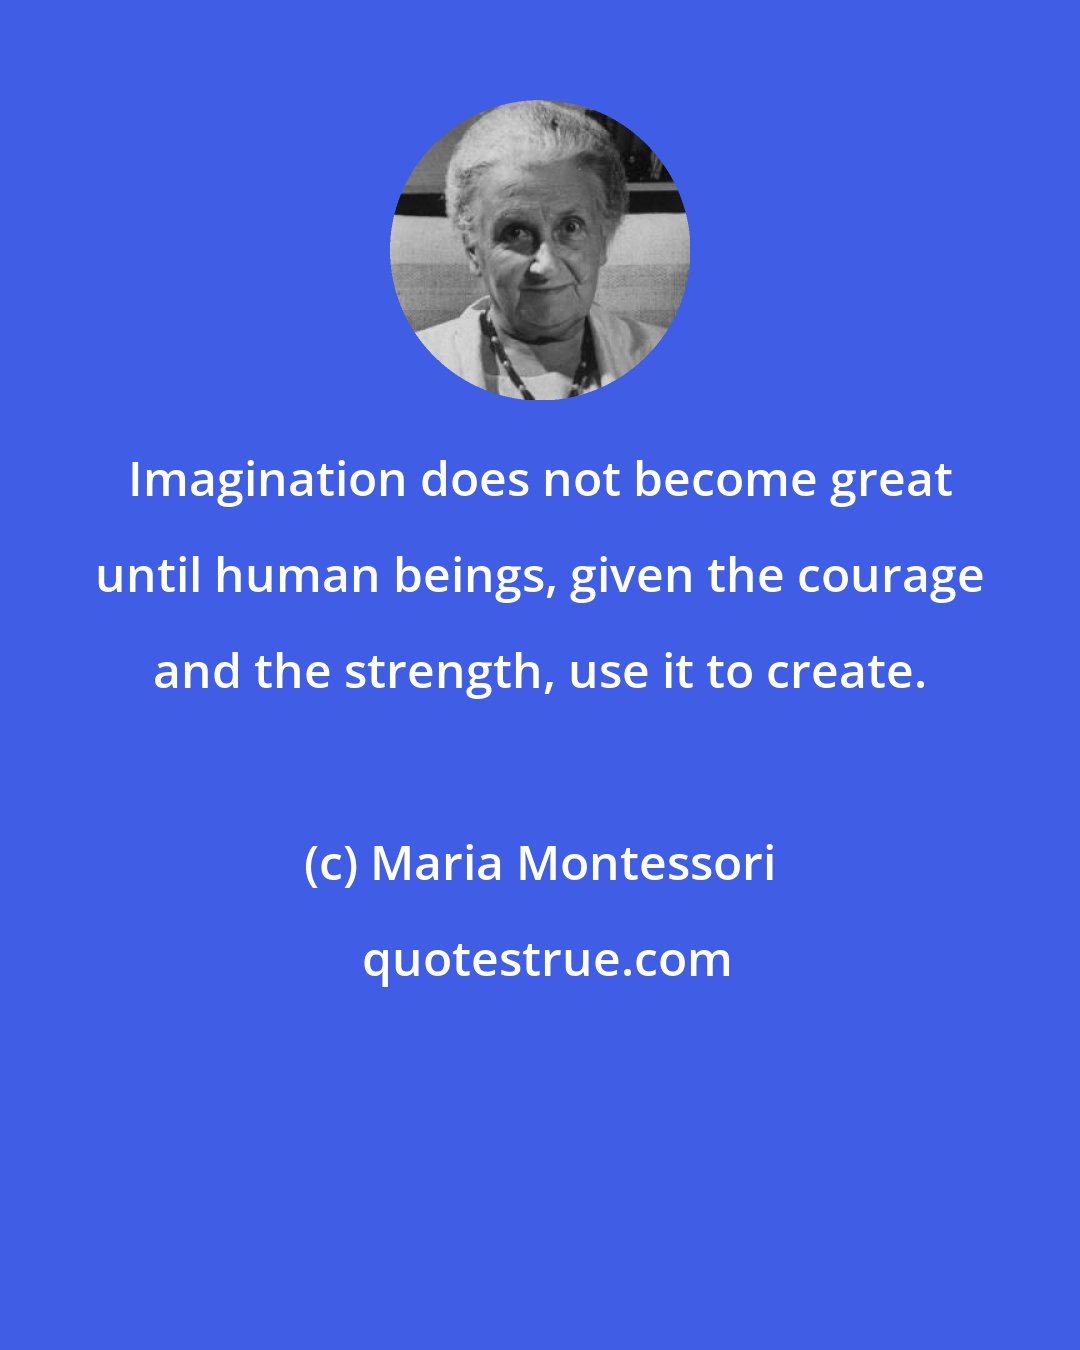 Maria Montessori: Imagination does not become great until human beings, given the courage and the strength, use it to create.